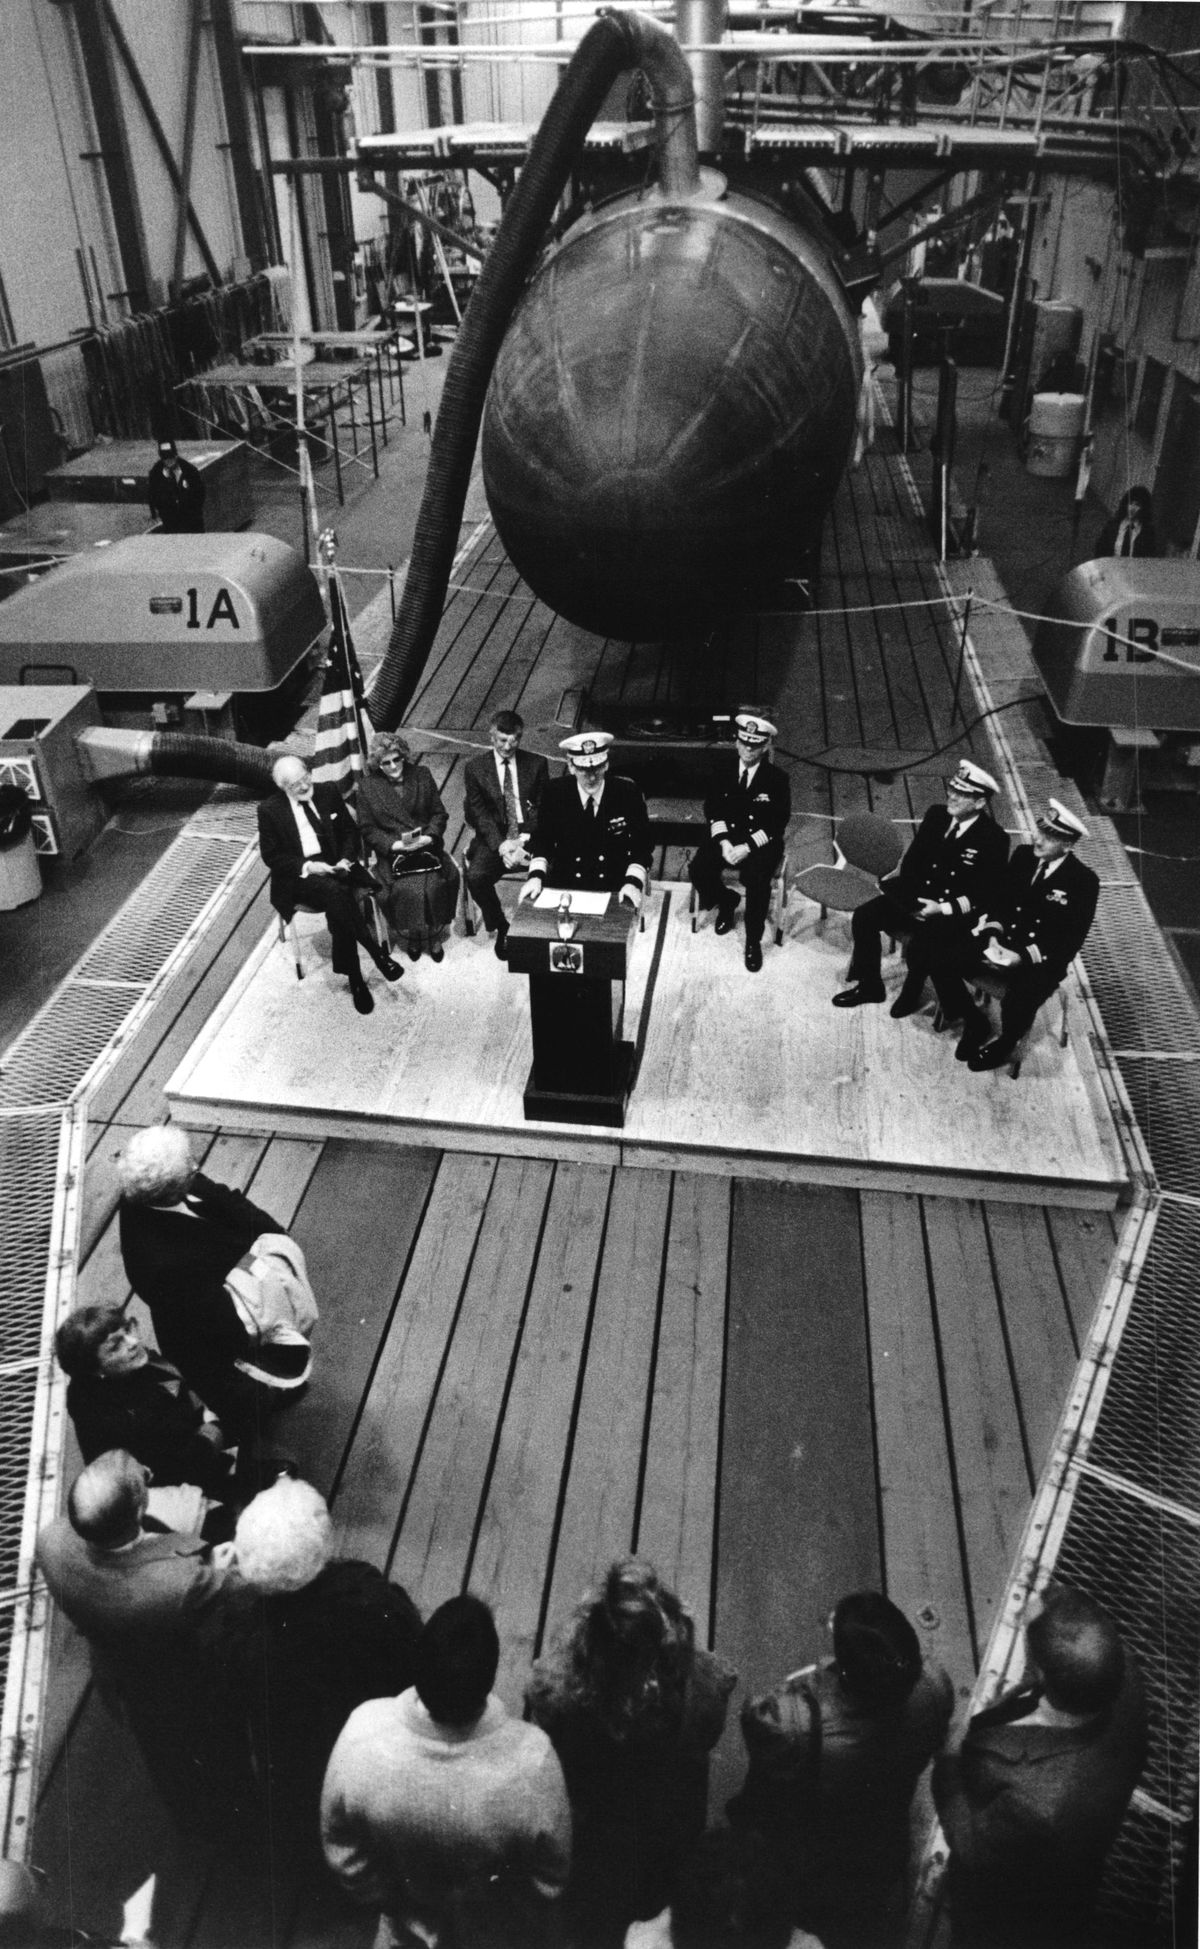 1993 – With the submarine Kokanee as a backdrop, a new commander took over the U.S. Navy’s Acoustic Research Detachment in Bayview, Idaho. (Christopher Anderson / The Spokesman-Review)